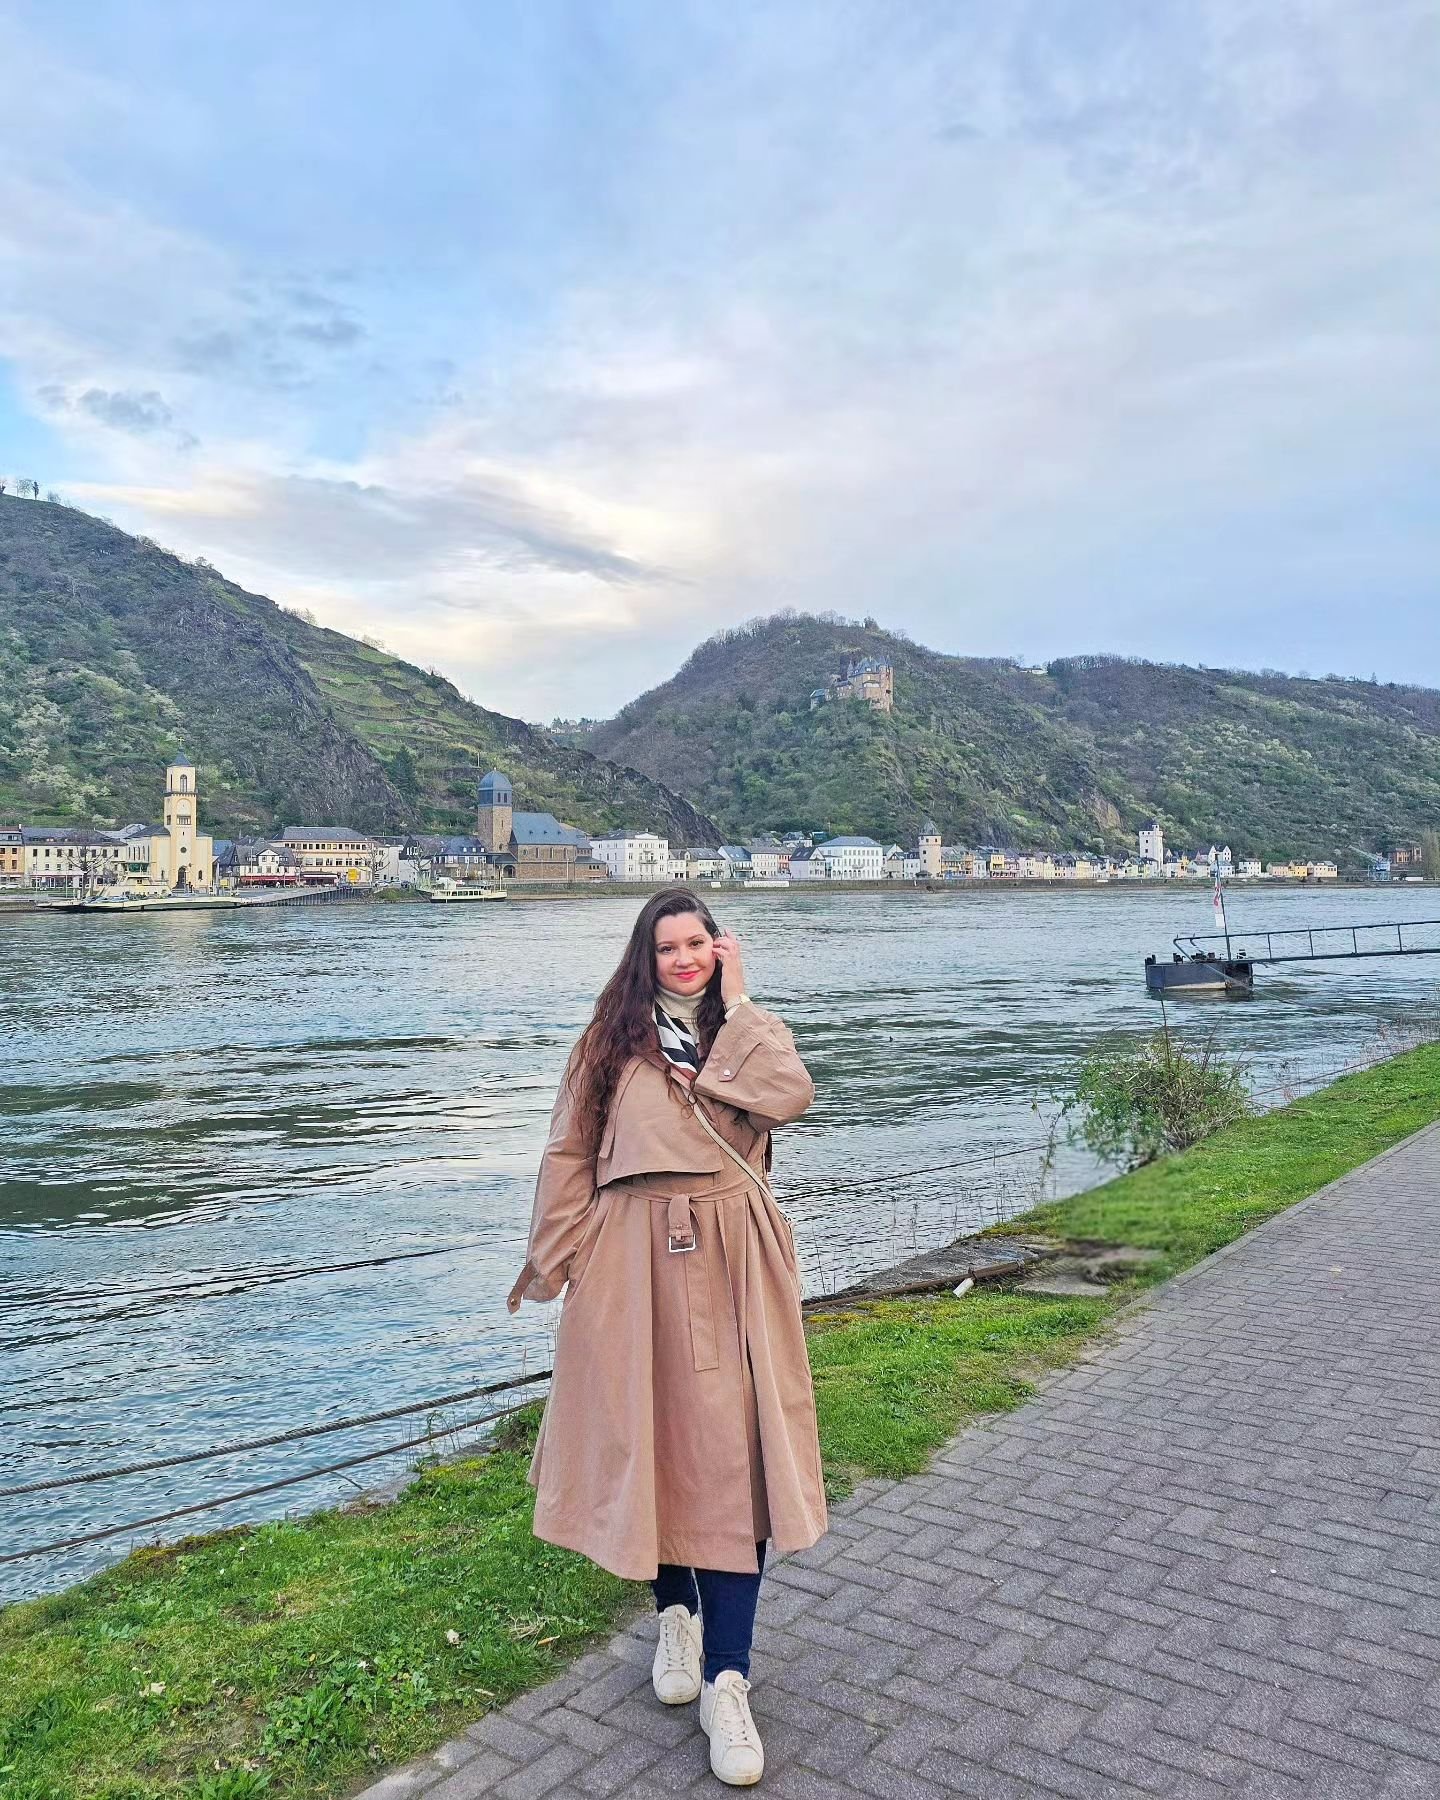 Weather is getting better in #Germany (and #Europe generally), so it's the perfect time to think of what places you can explore! Germany is known for (aside from #nature hikes) its cute towns, and one of those hidden gems is St. Goar on the Rhine riv